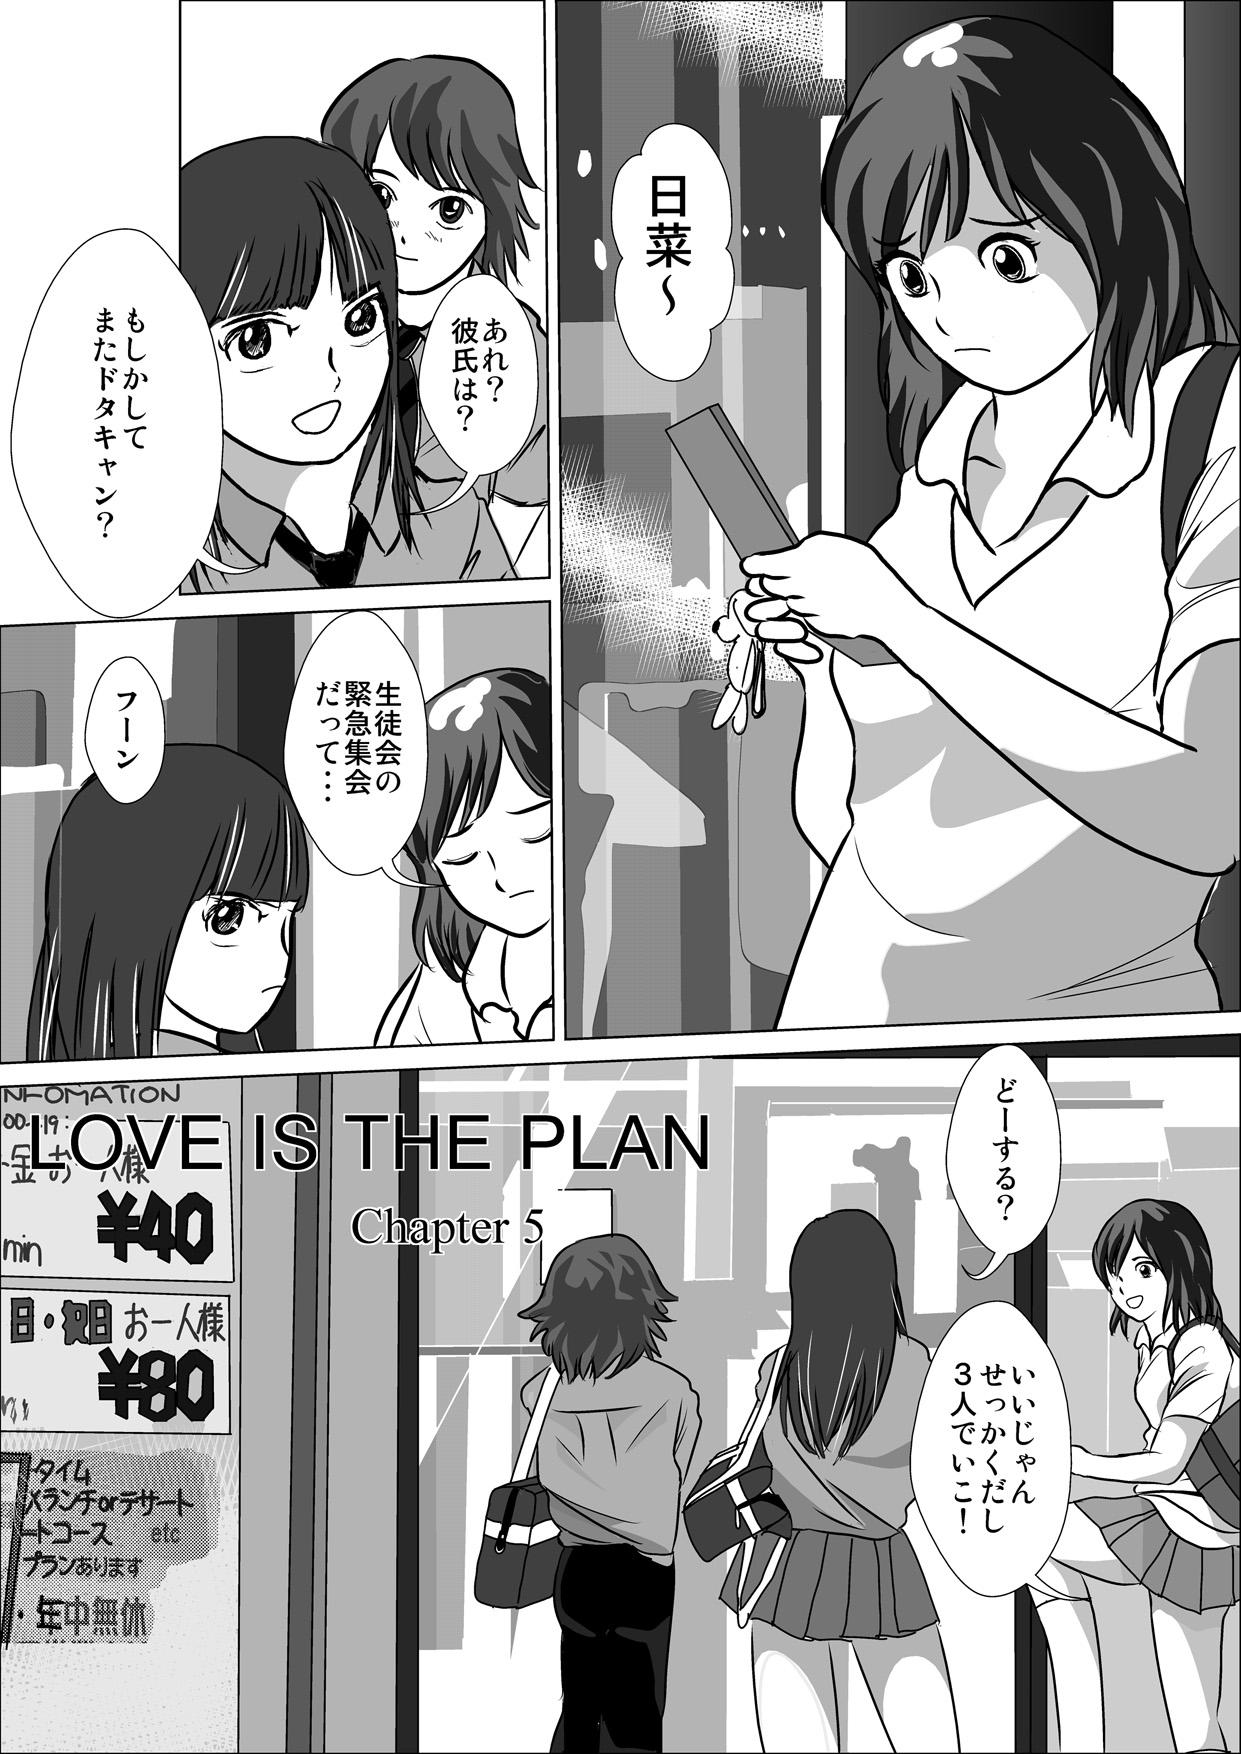 Dorm LOVE IS THE PLAN Chapter 5 Plug - Page 11